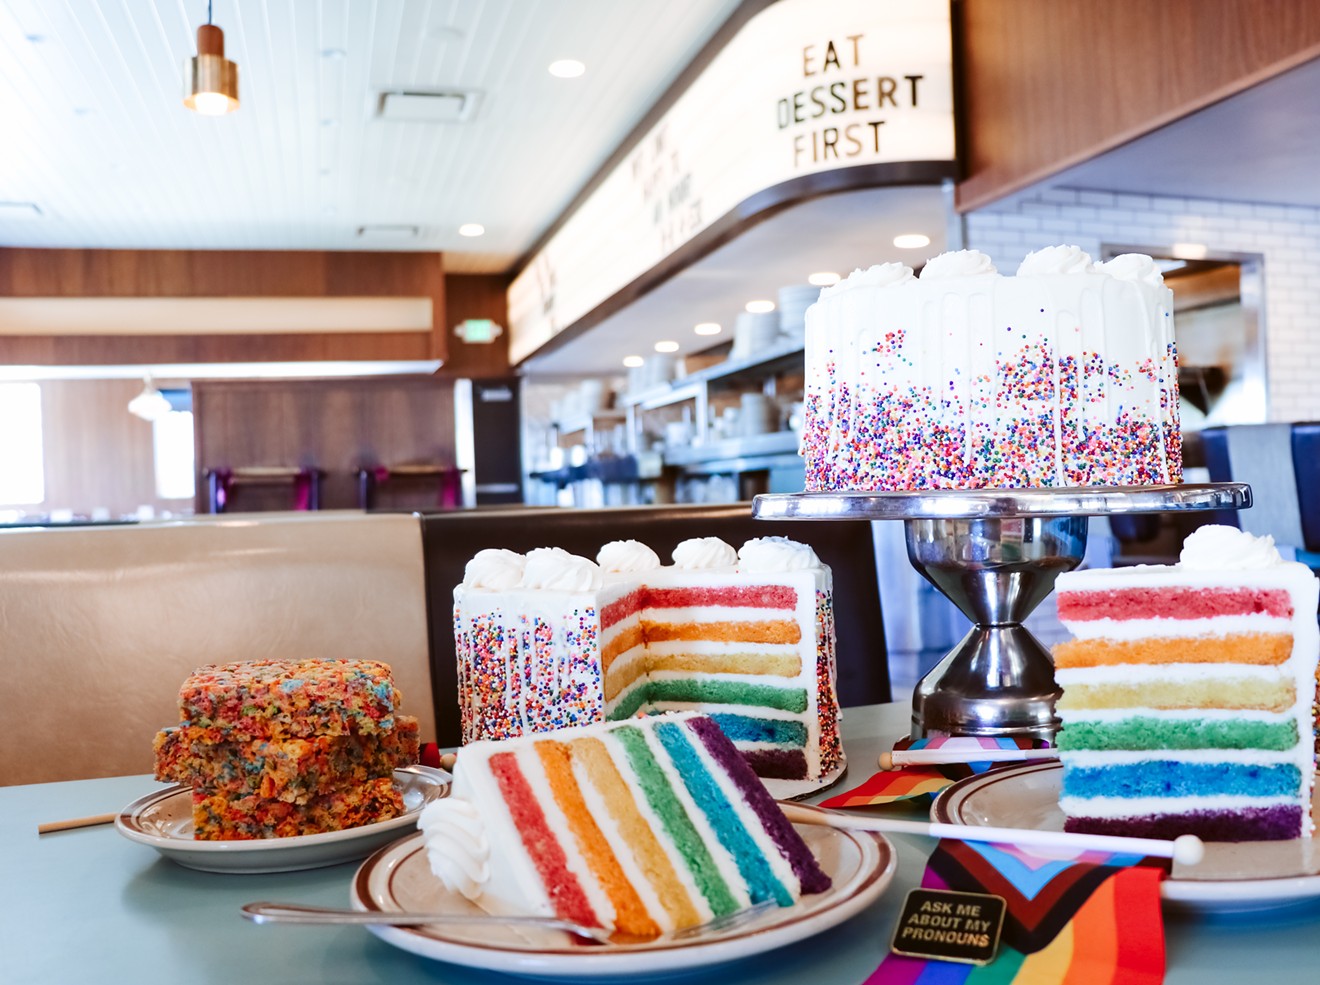 100% of sales from Steuben's rainbow treats will be donated to the Center's Rainbow Alley.